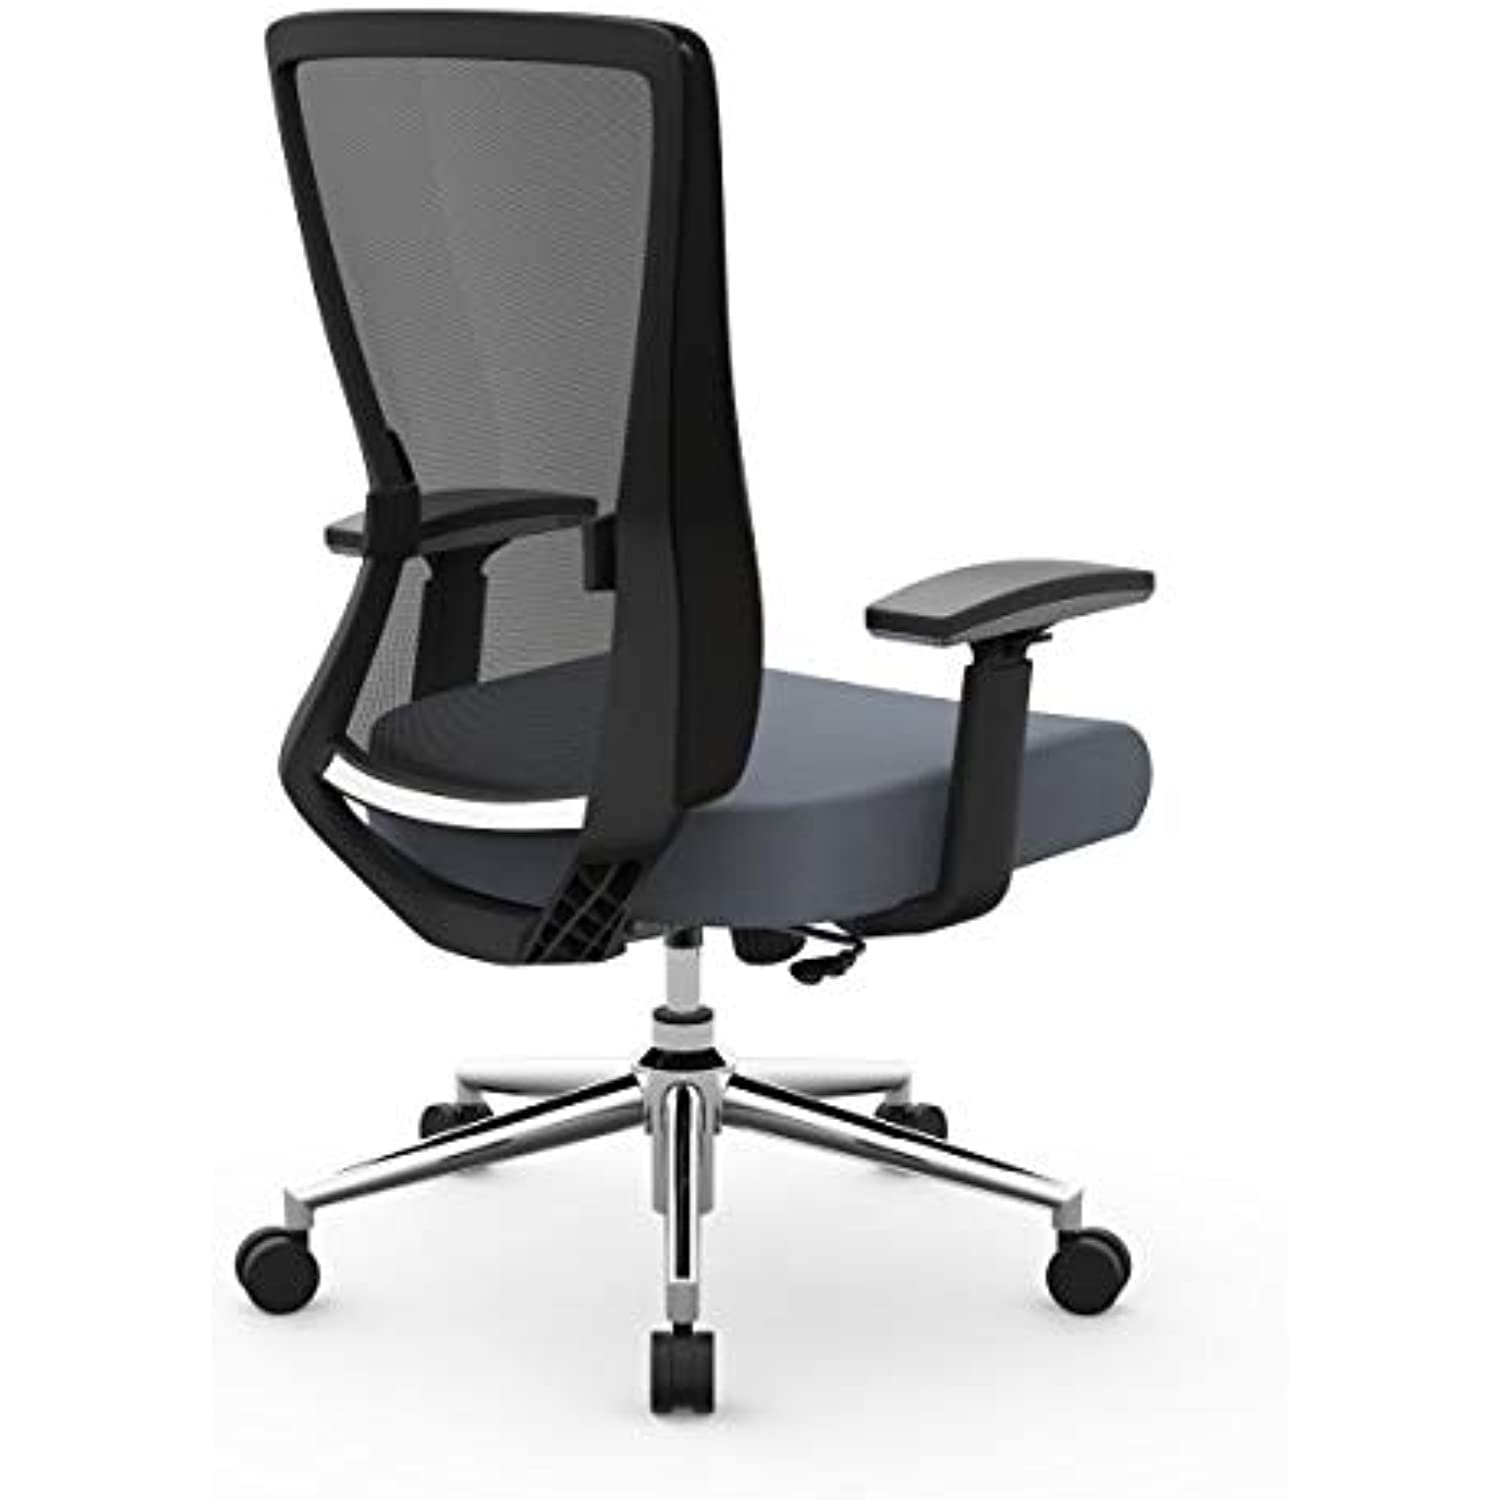 Realspace Levari Faux Leather Mid-Back Task Chair, Gray/Black - image 5 of 8